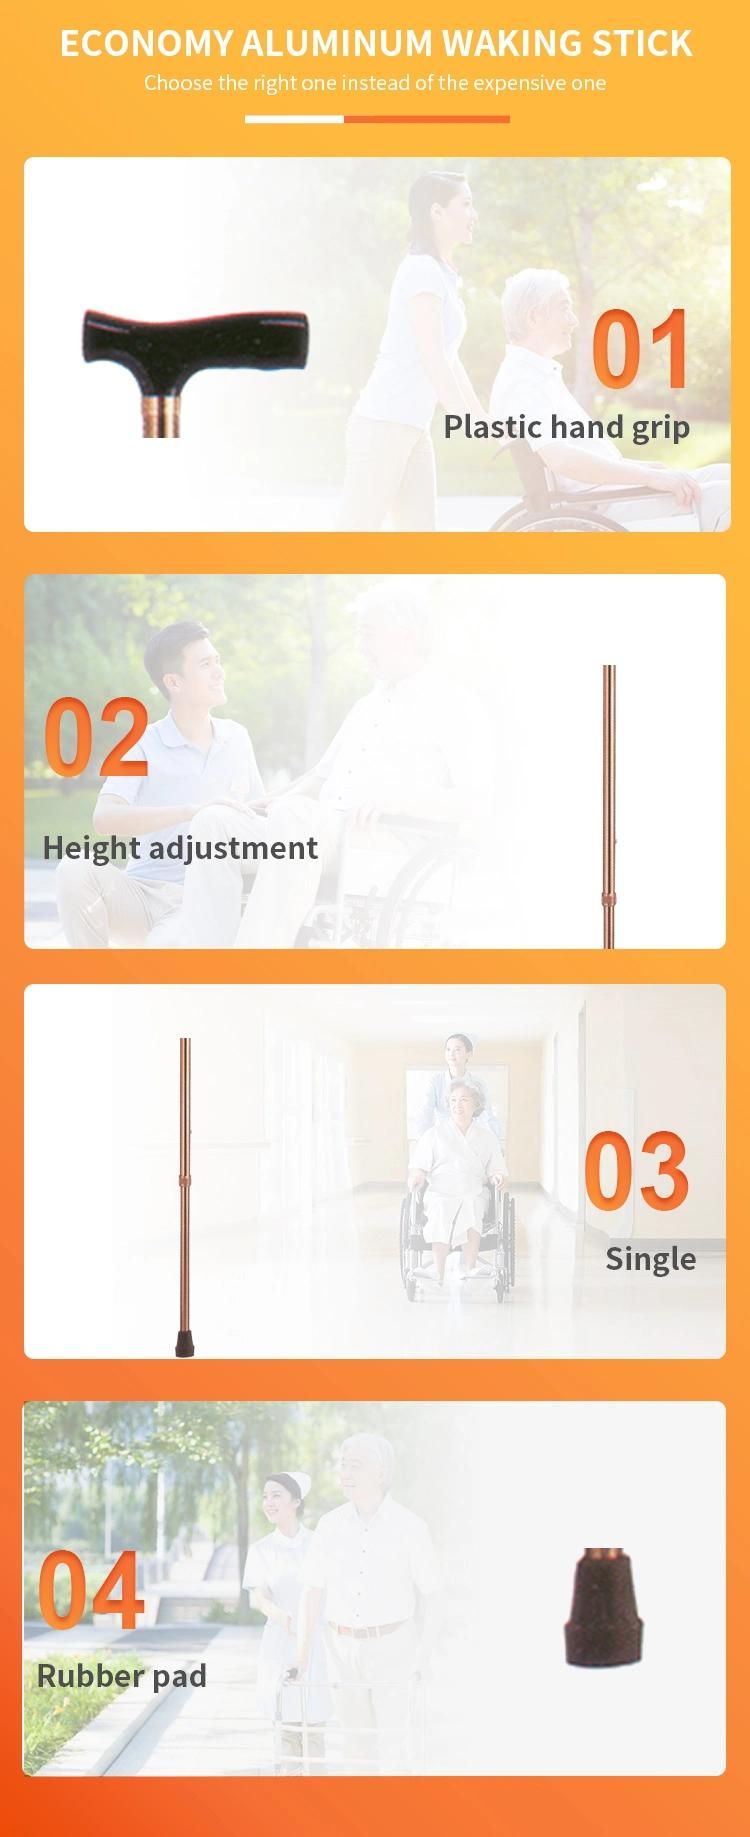 Non-Slip Hand Grip and Non-Slip Foot Pad Aluminum Lightweight Easy Carry portable Adjustable Height Walking Stick Net Weight 0.5kgs Weight Capacity 100kgs